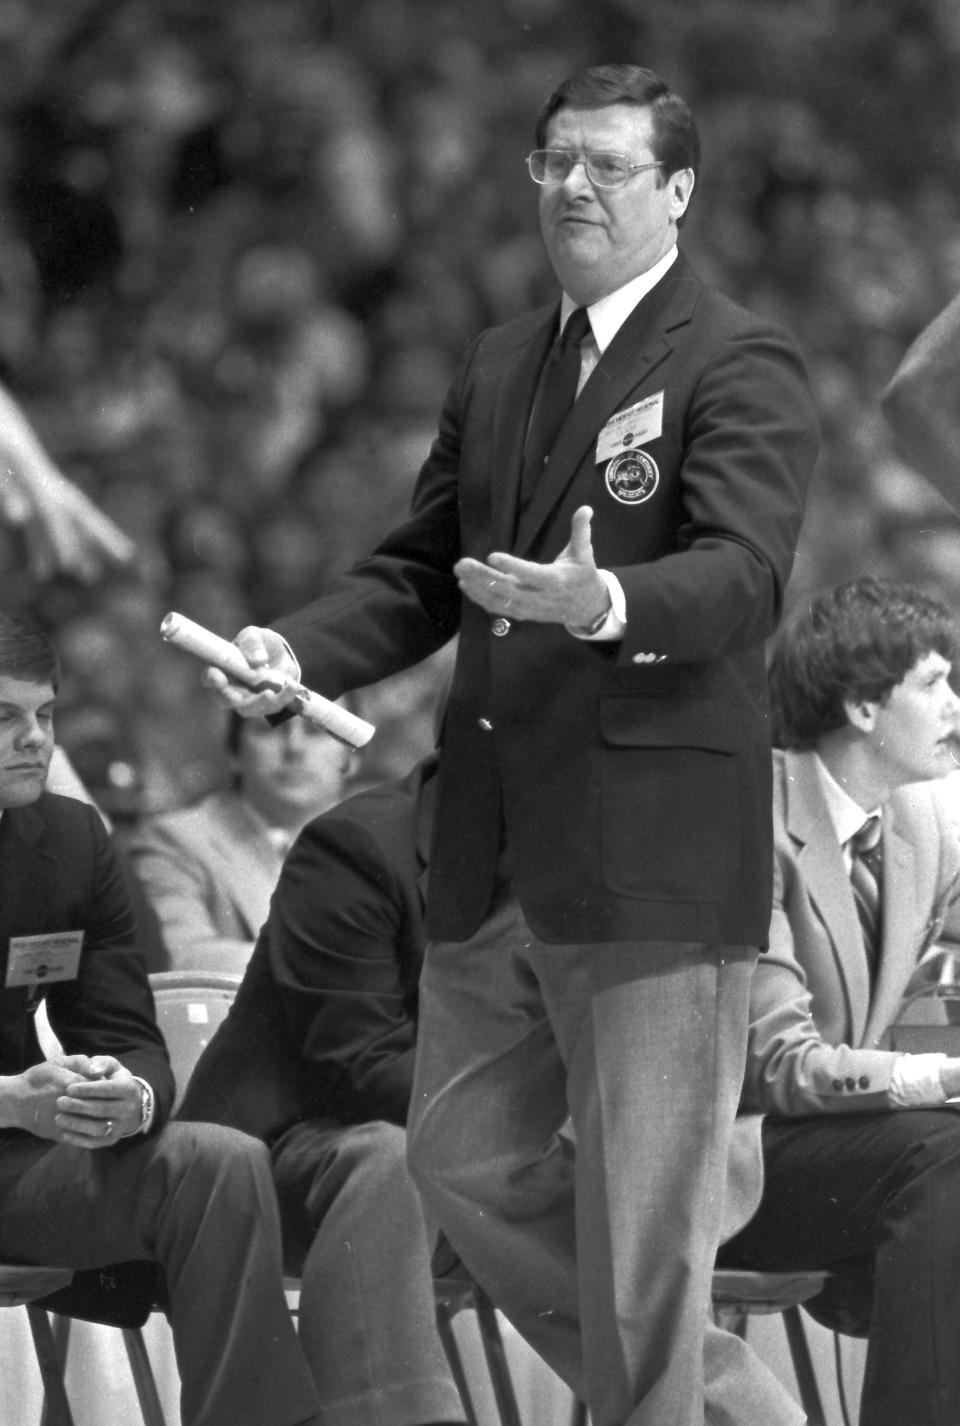 FILE - This undated file photo shows Kentucky basketball coach Joe B. Hall on the sidelines. The former Kentucky basketball coach has died at age 93. The program announced Hall’s death in a social media post Saturday, Jan. 15, 2022 after the coach’s family notified current Wildcats coach John Calipari.(AP Photo/File)